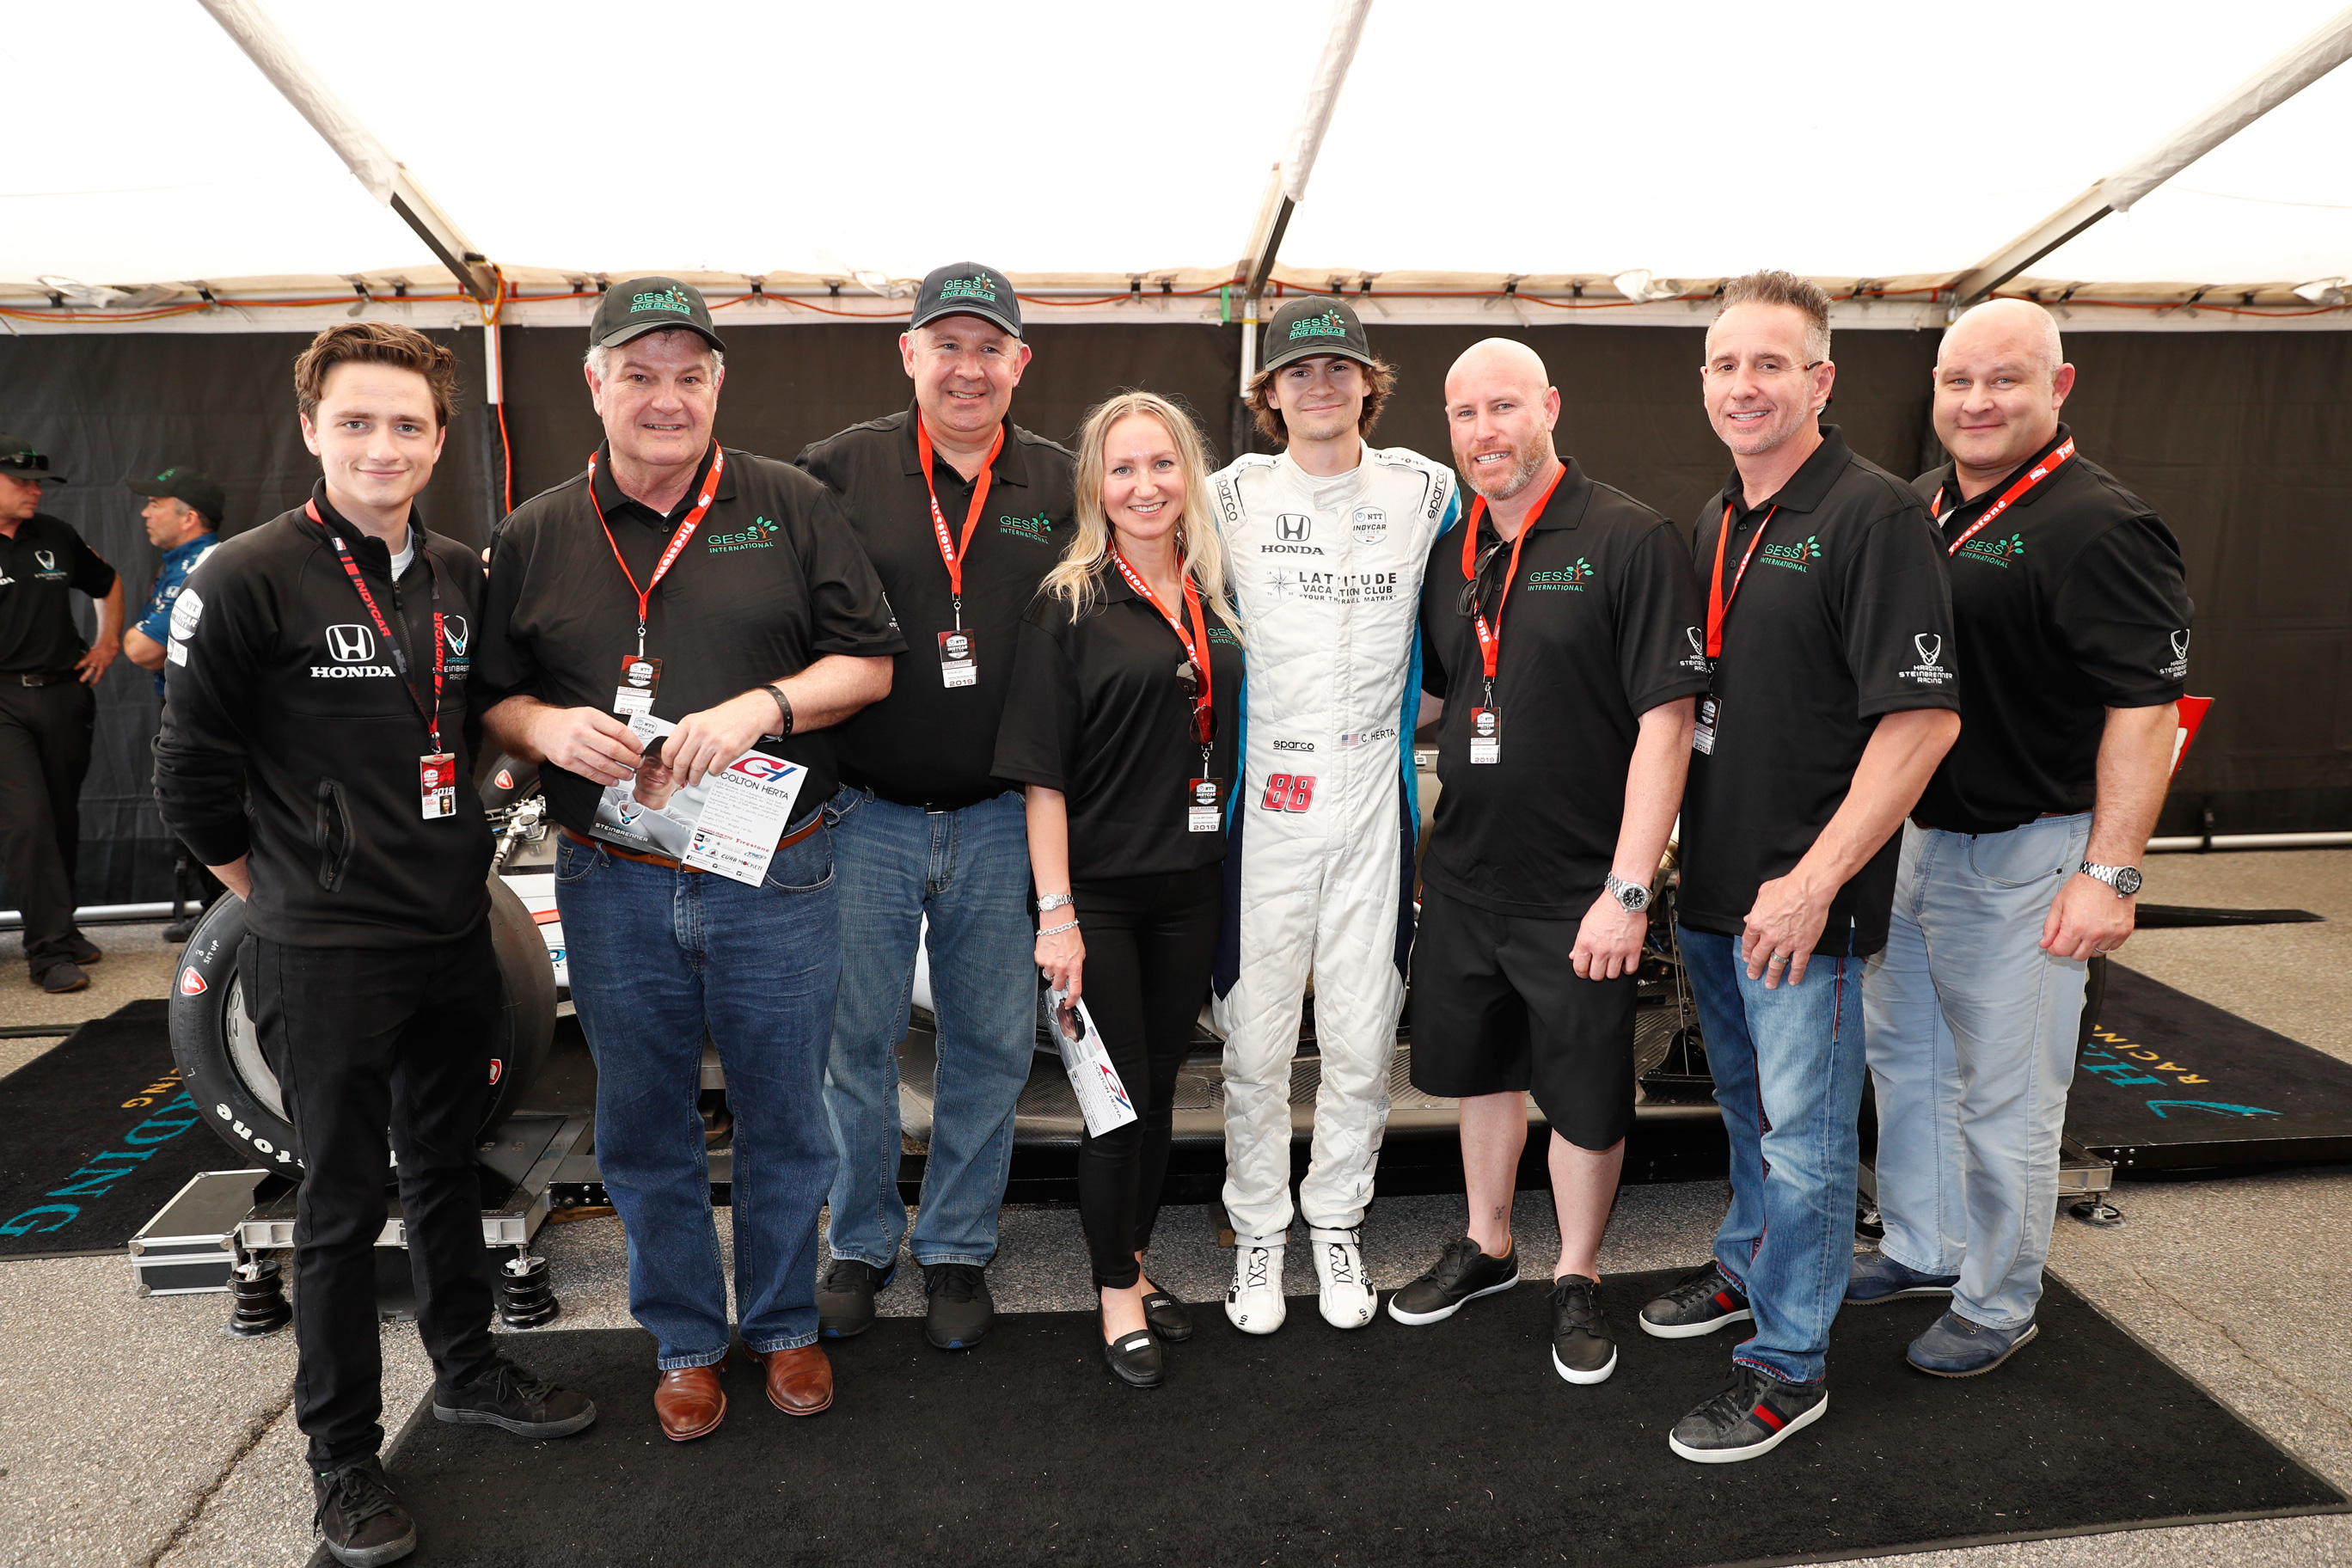 GESS International partners with Harding Steinbrenner Racing as primary sponsor for last weekend’s Indy Grand Prix of Alabama and as an associate sponsor of the 45th Acura Grand Prix of Long Beach..